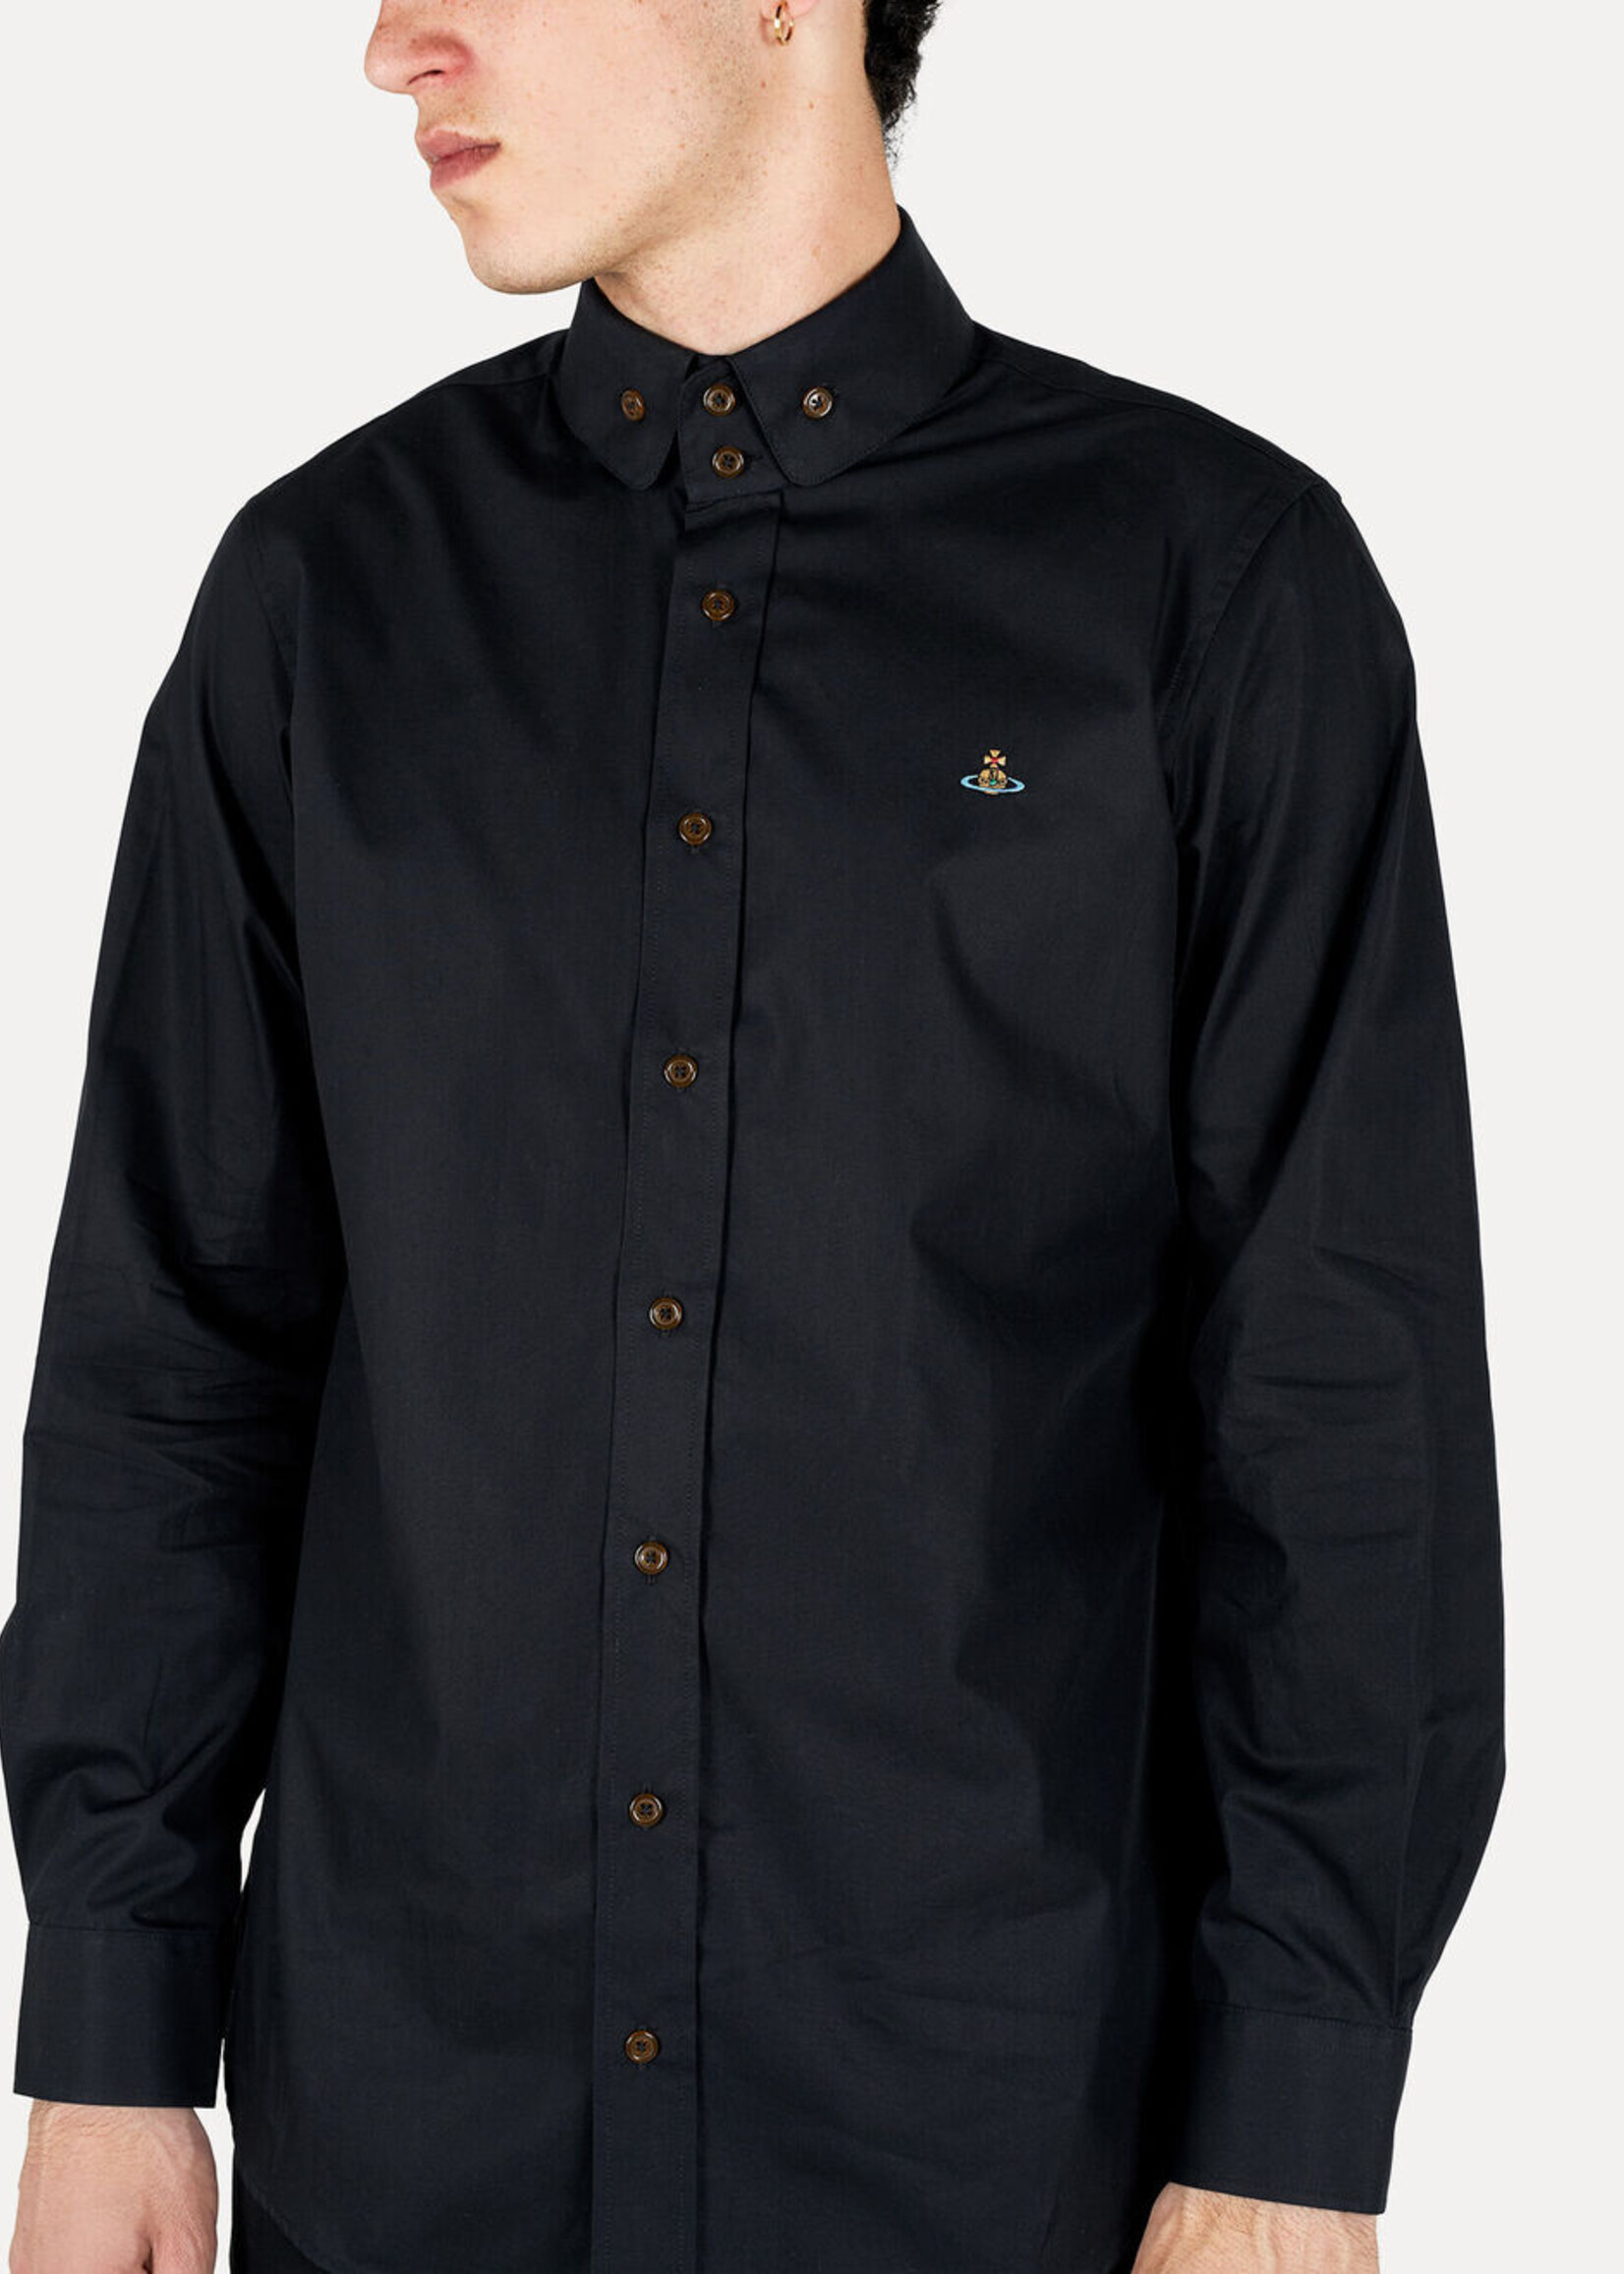 VIVIENNE WESTWOOD Two Button Krall Shirt in Black